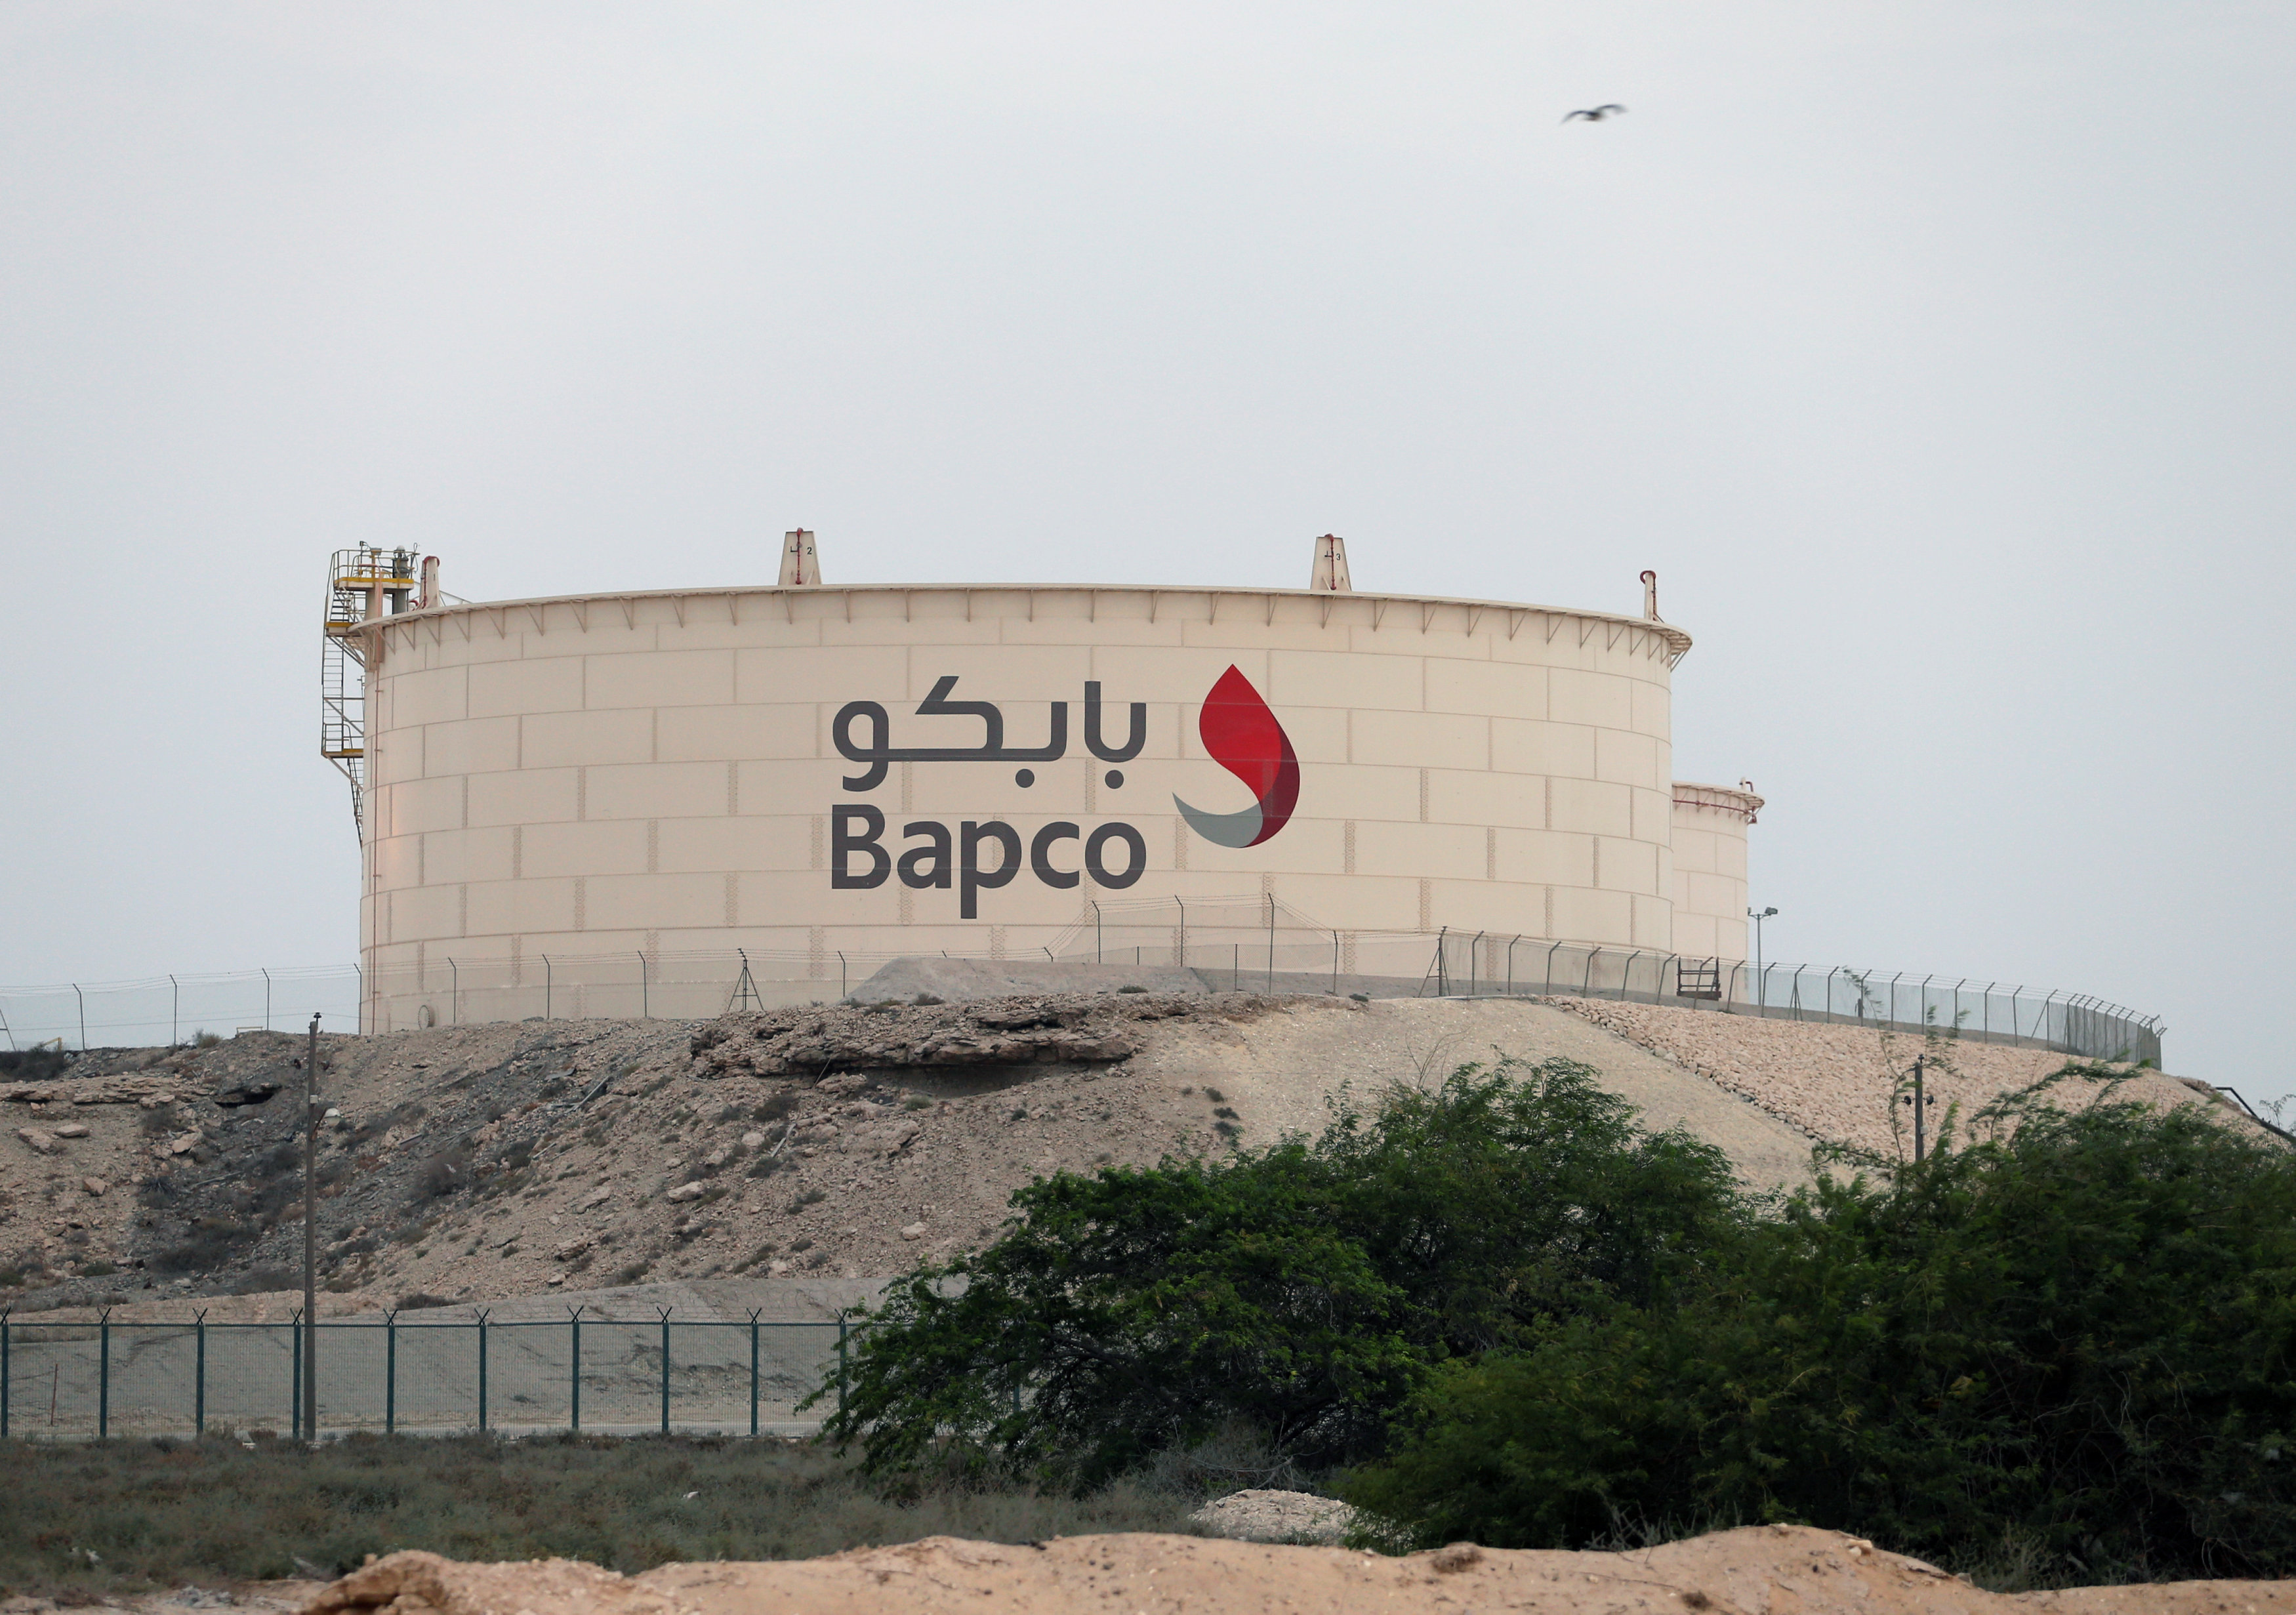 Bahrain to sign Bapco's expansion contracts before year end: Minister